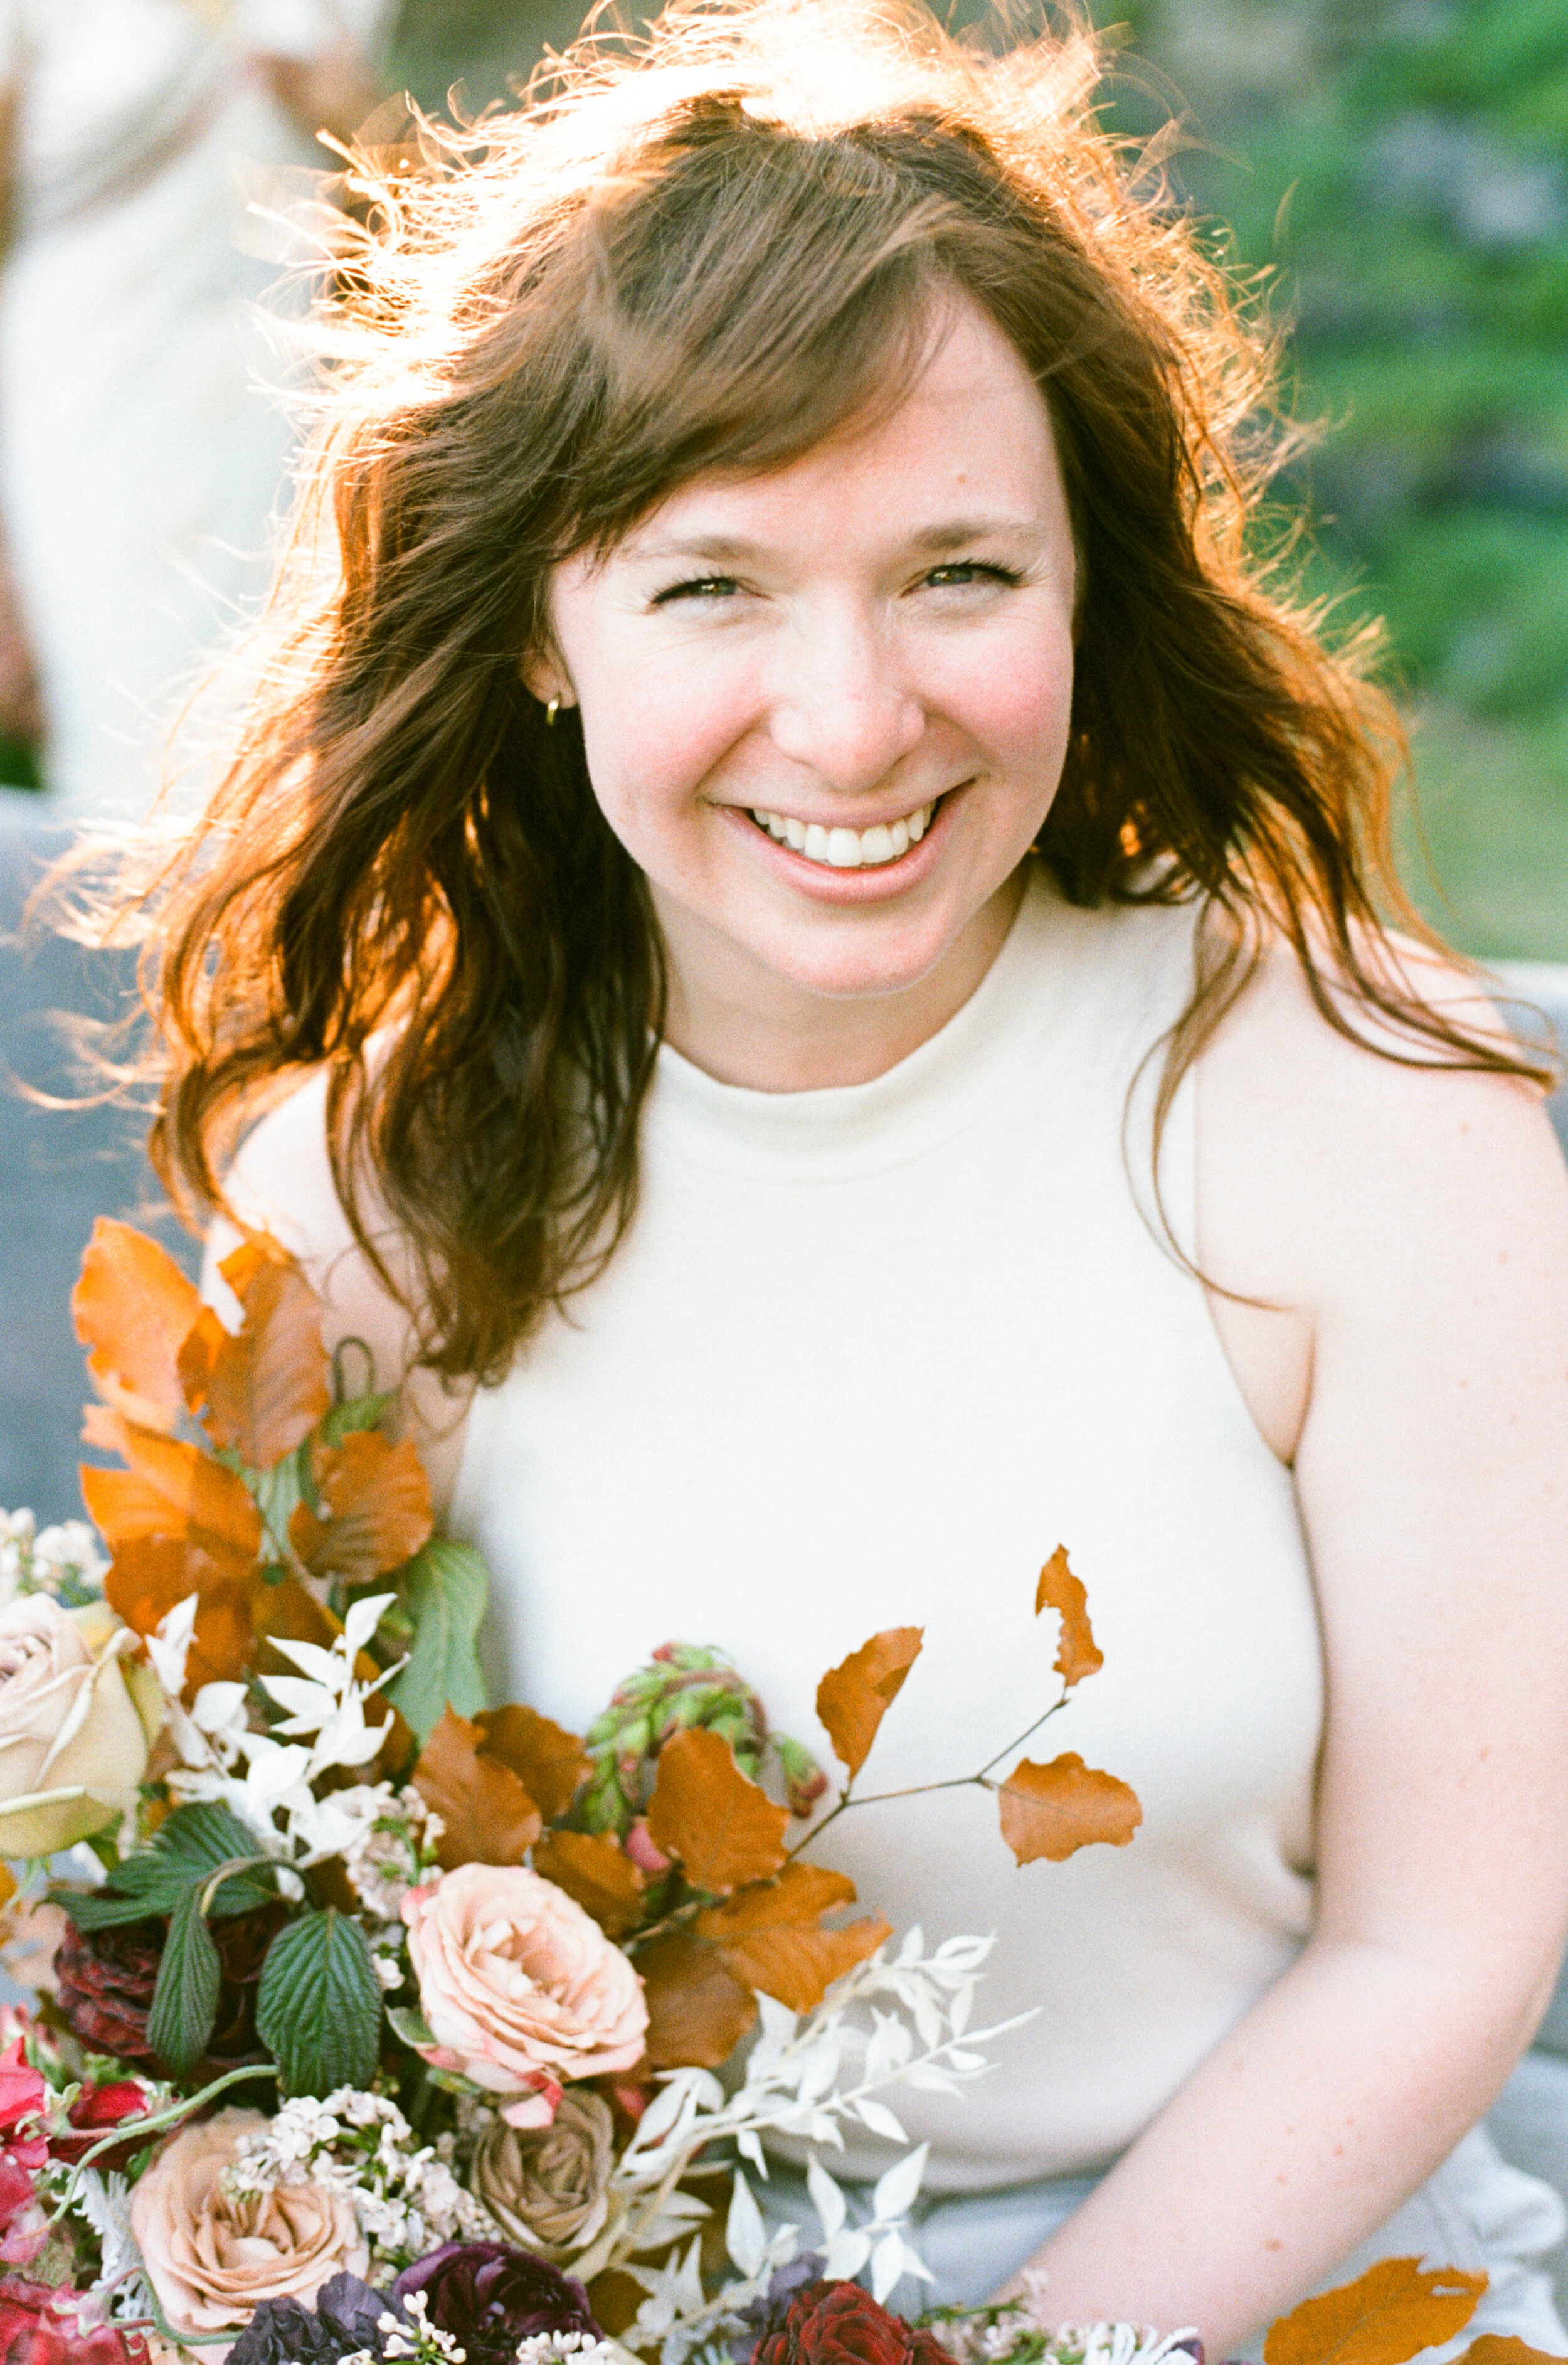 Mary Love Richardson of Rosemary & Finch Floral Design in Nashville, TN